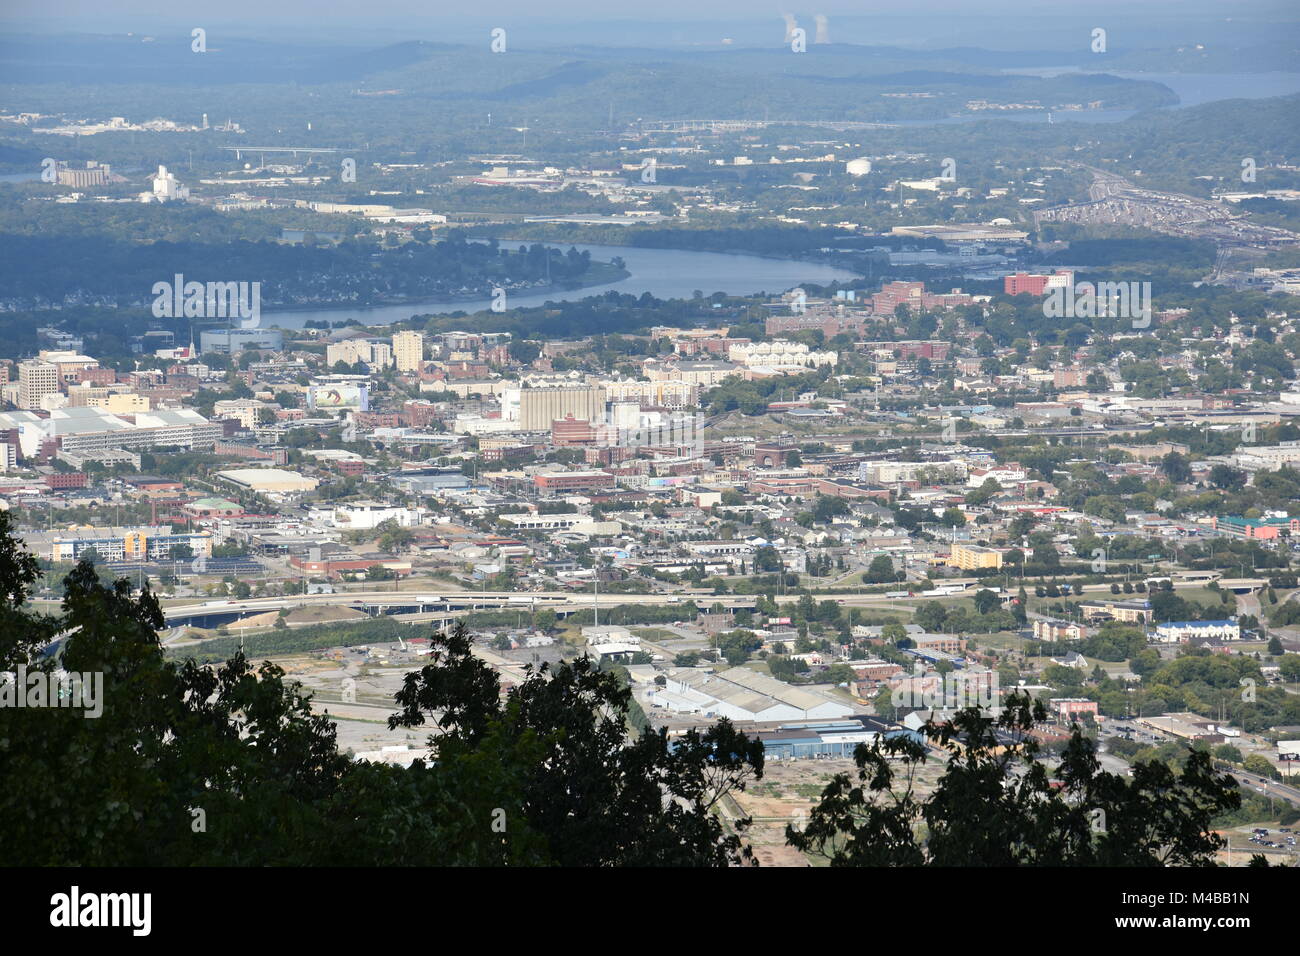 View of Chattanooga In Tennessee, from the Incline Railway Stock Photo